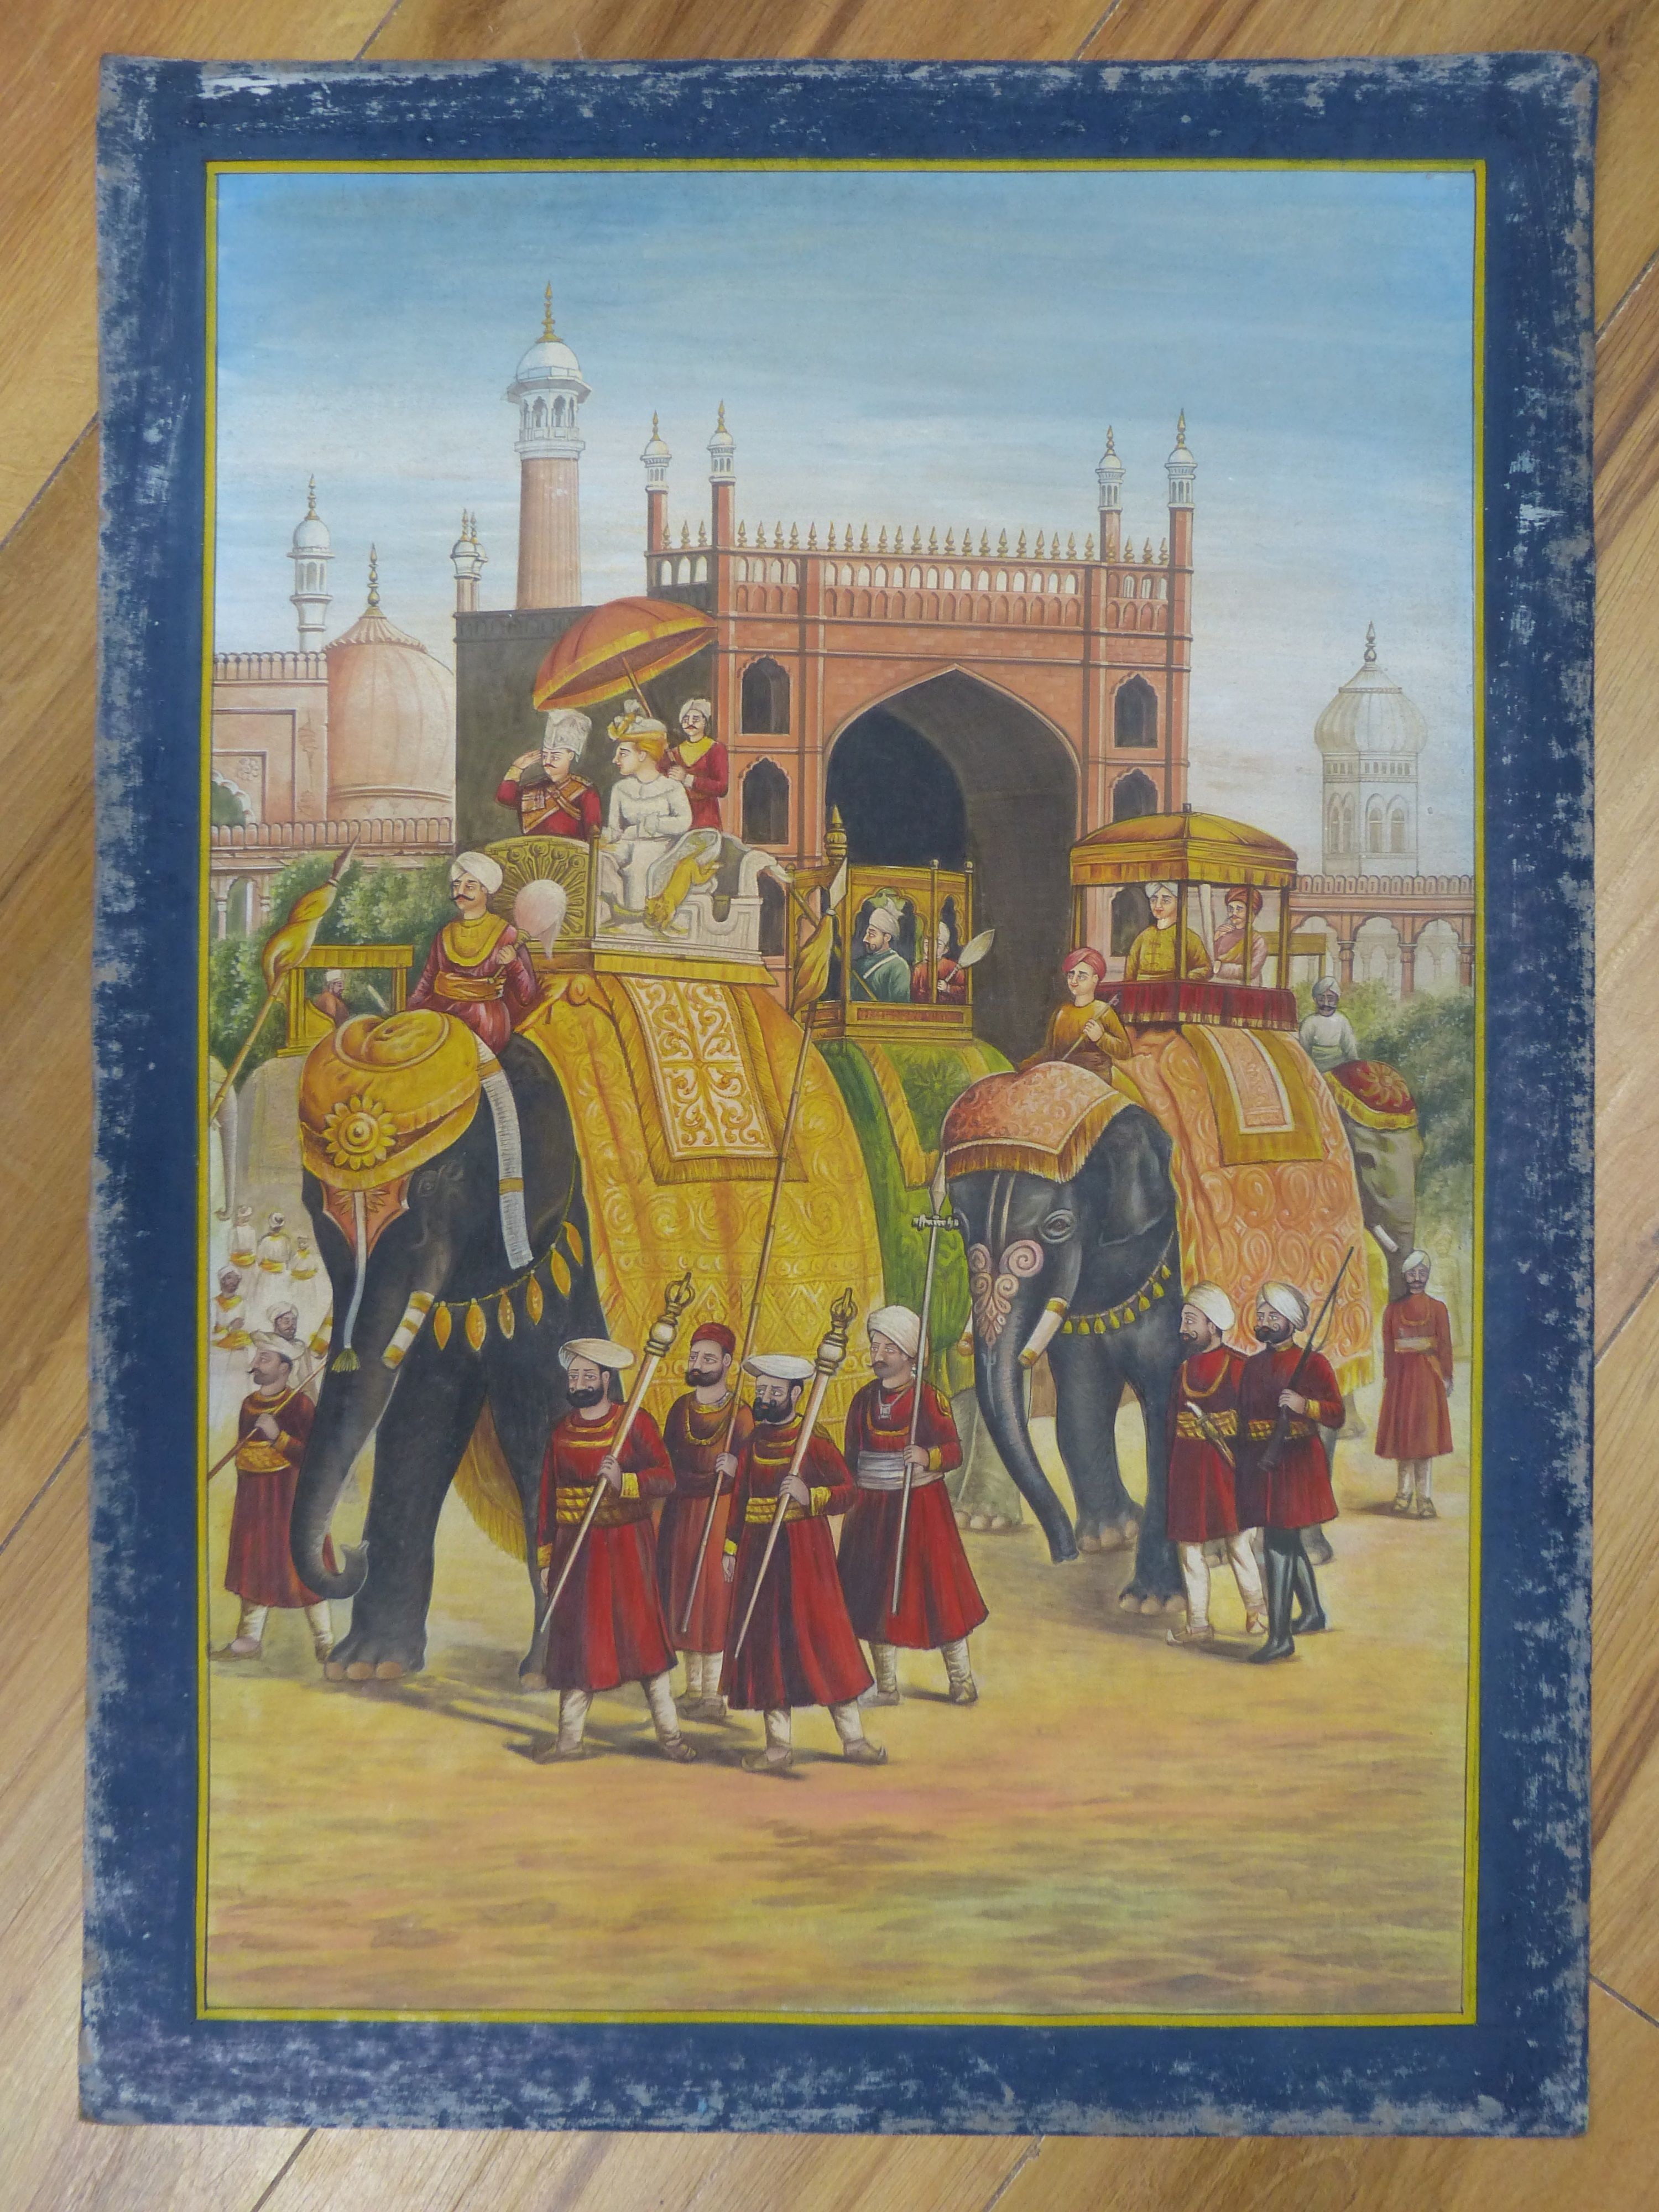 Company School, watercolour, English nobles seated in howdahs in procession, 49 x 34cm, unframed                                                                                                                            